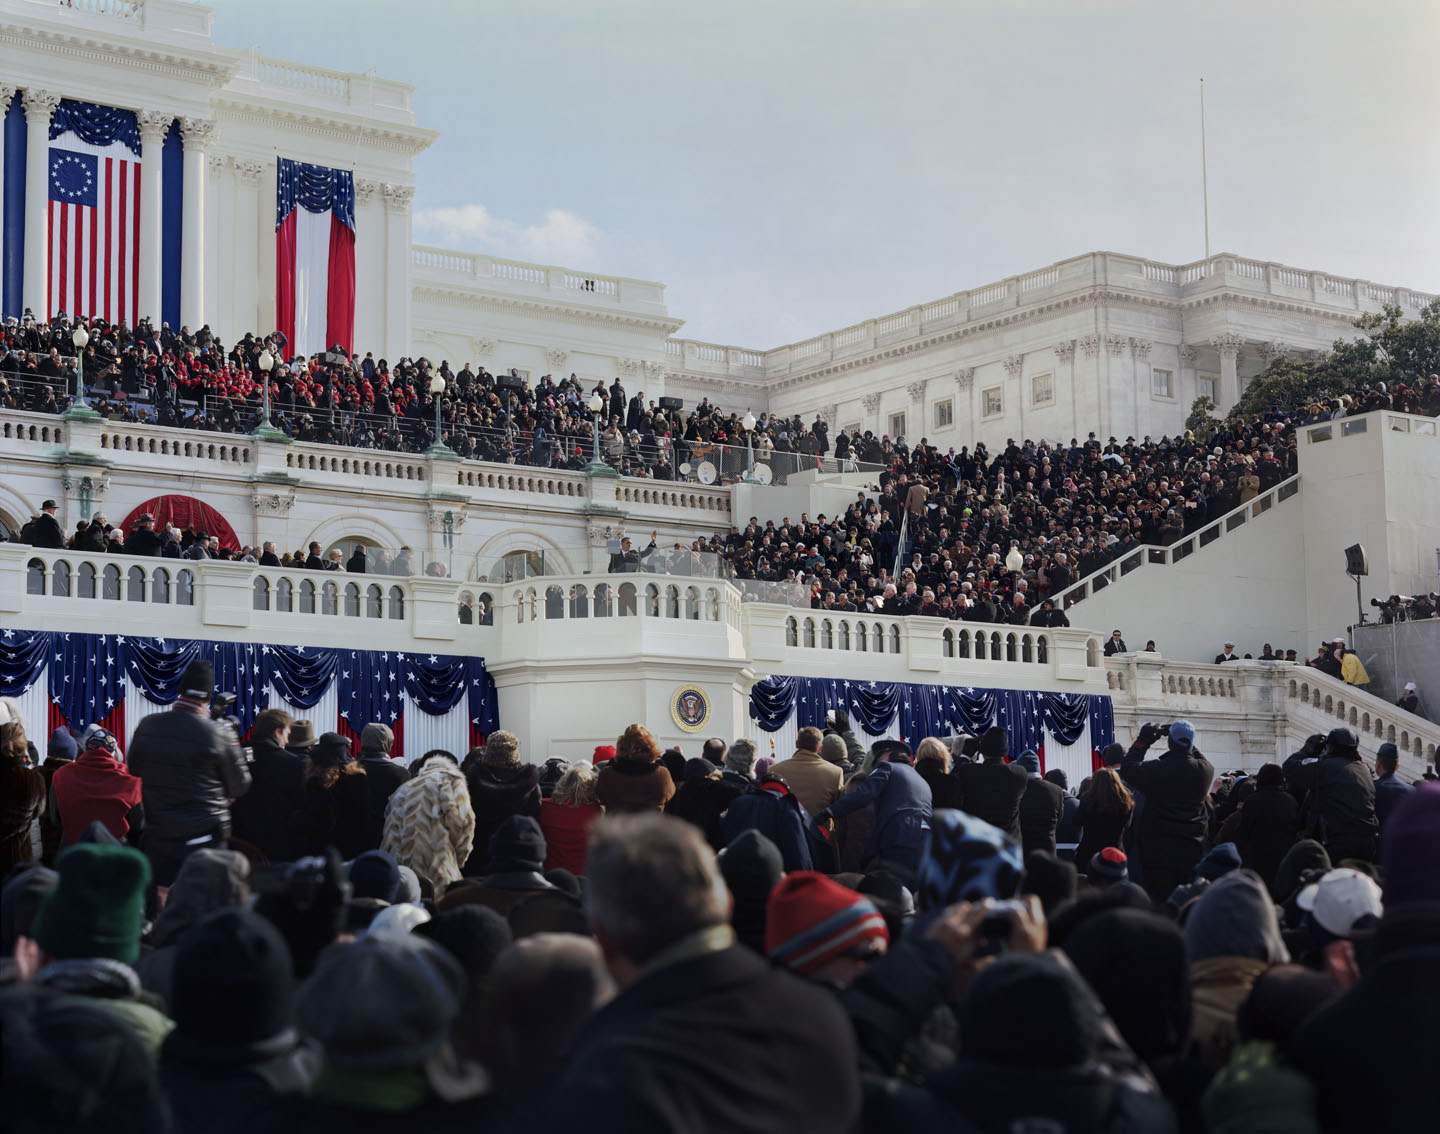 Obama Inauguration (After Swearing In)